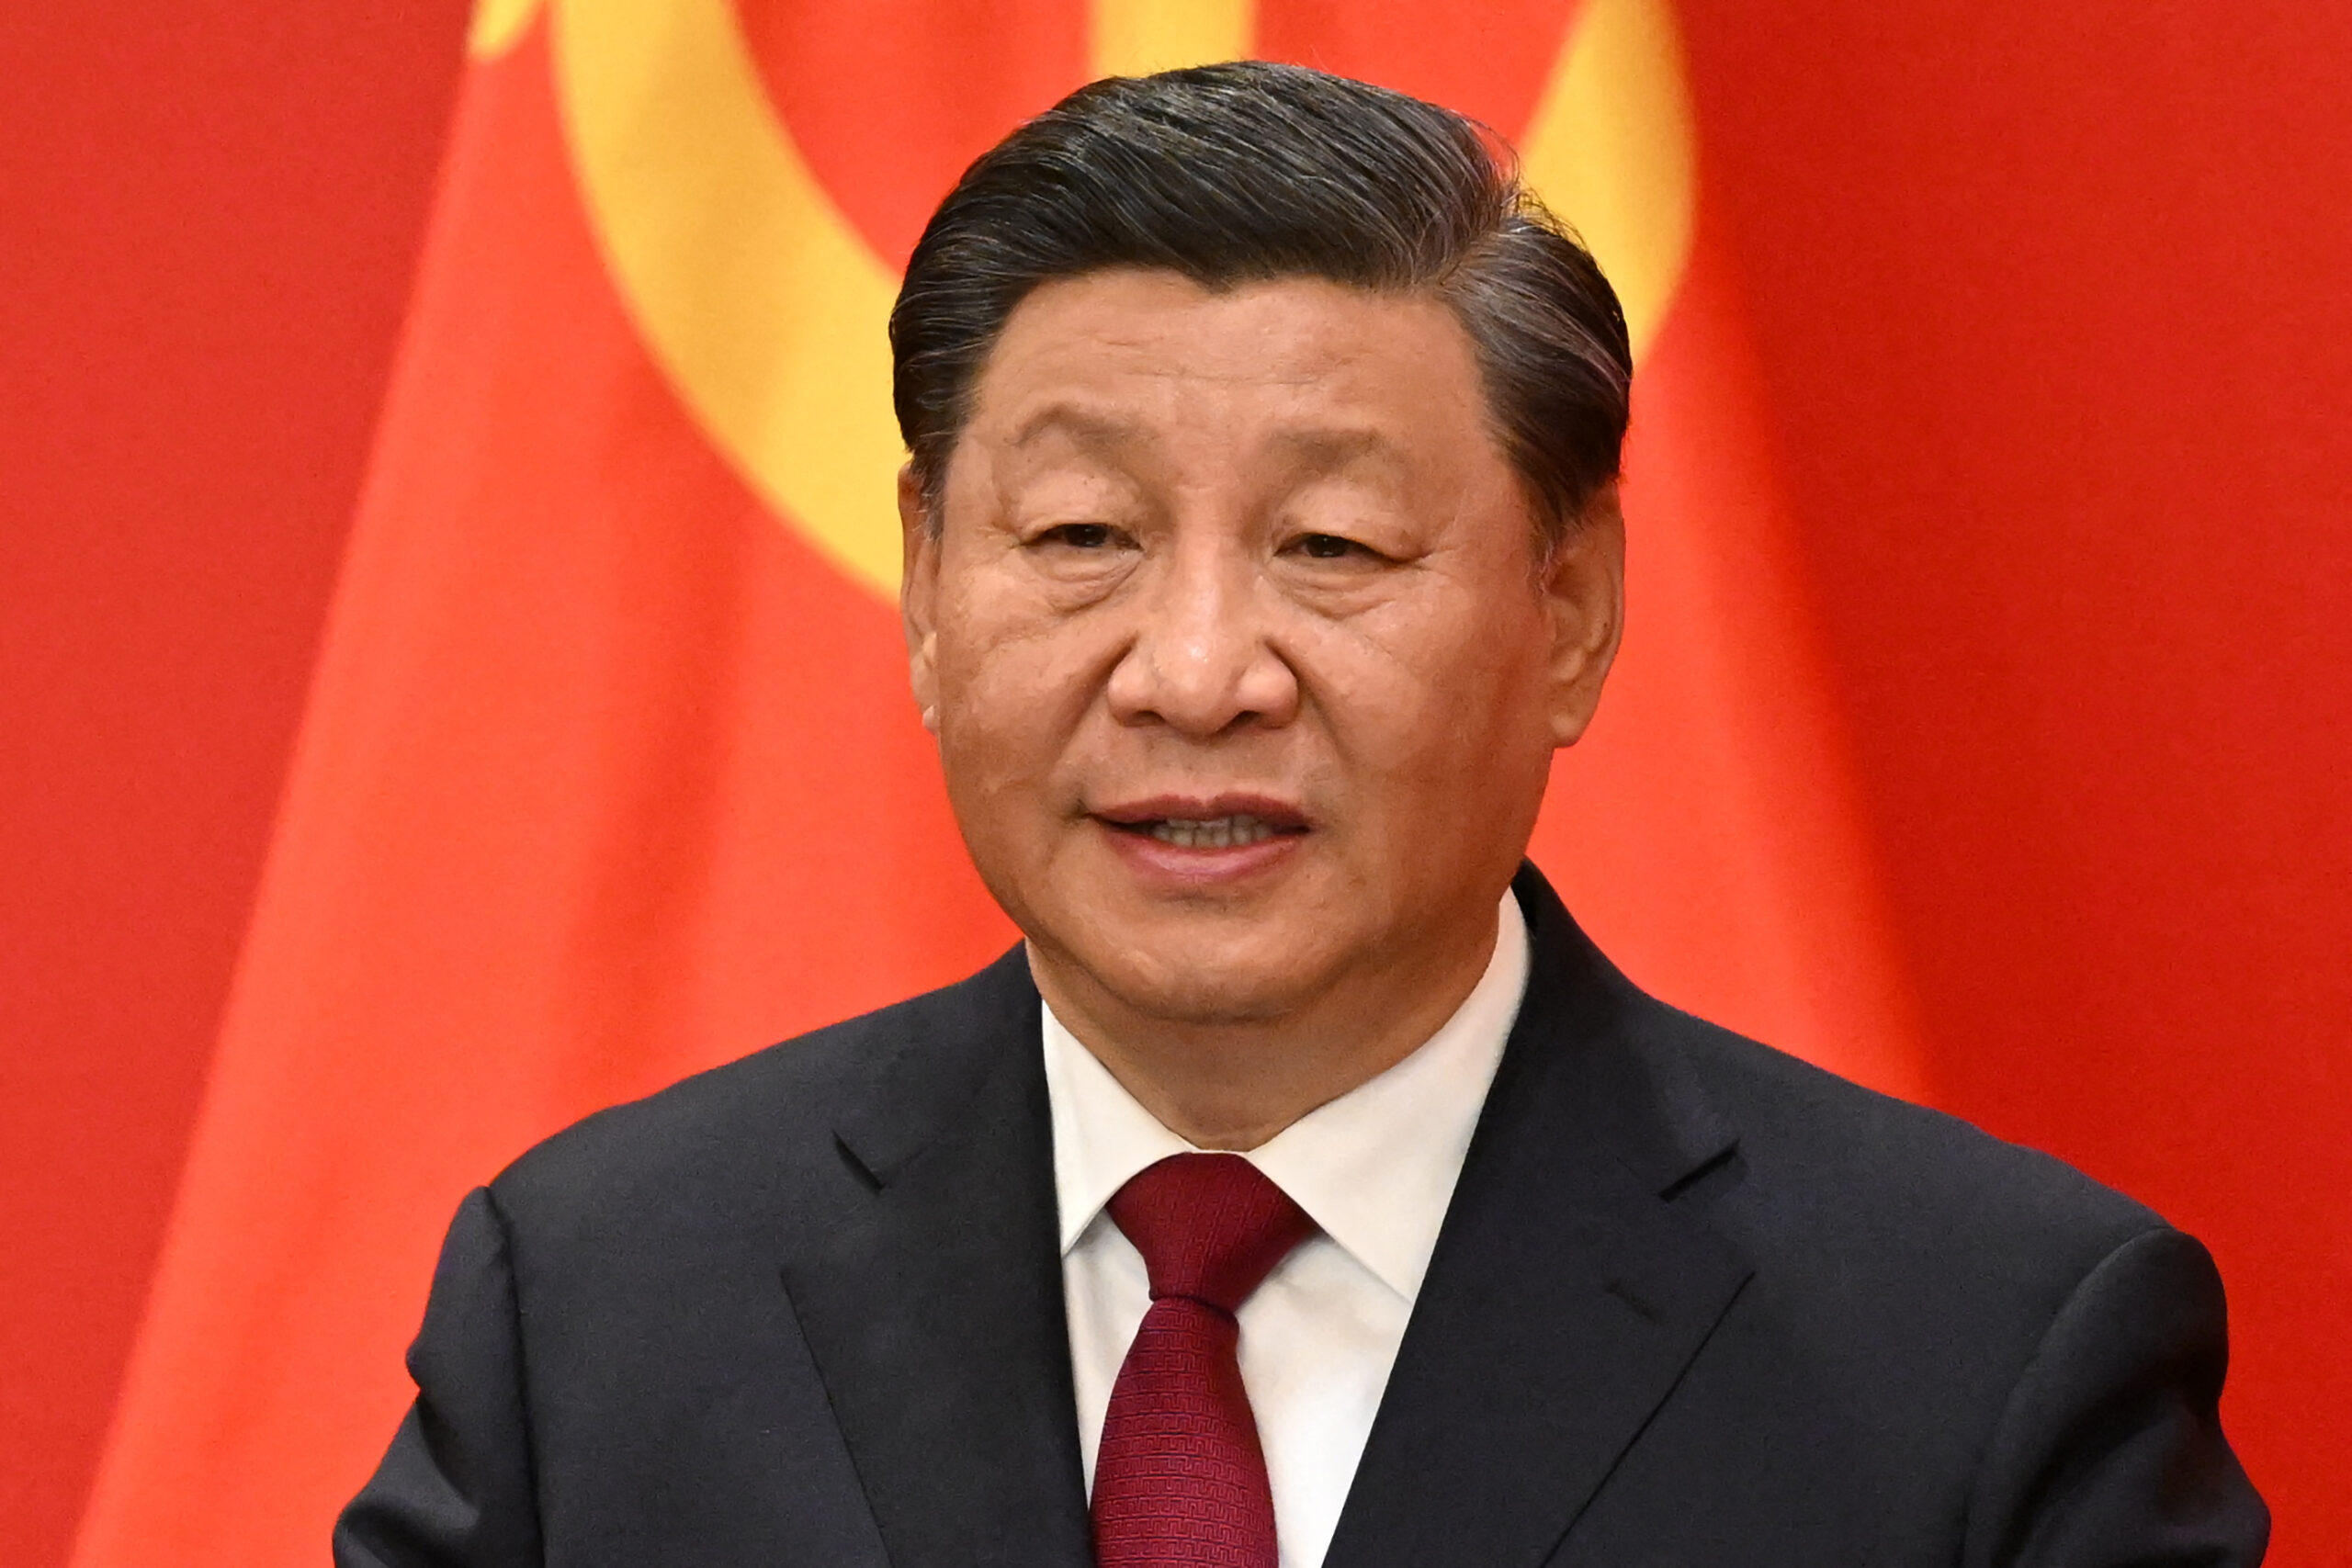 Xi Jinping wants to China be the world's most technologically superior nation by 2049